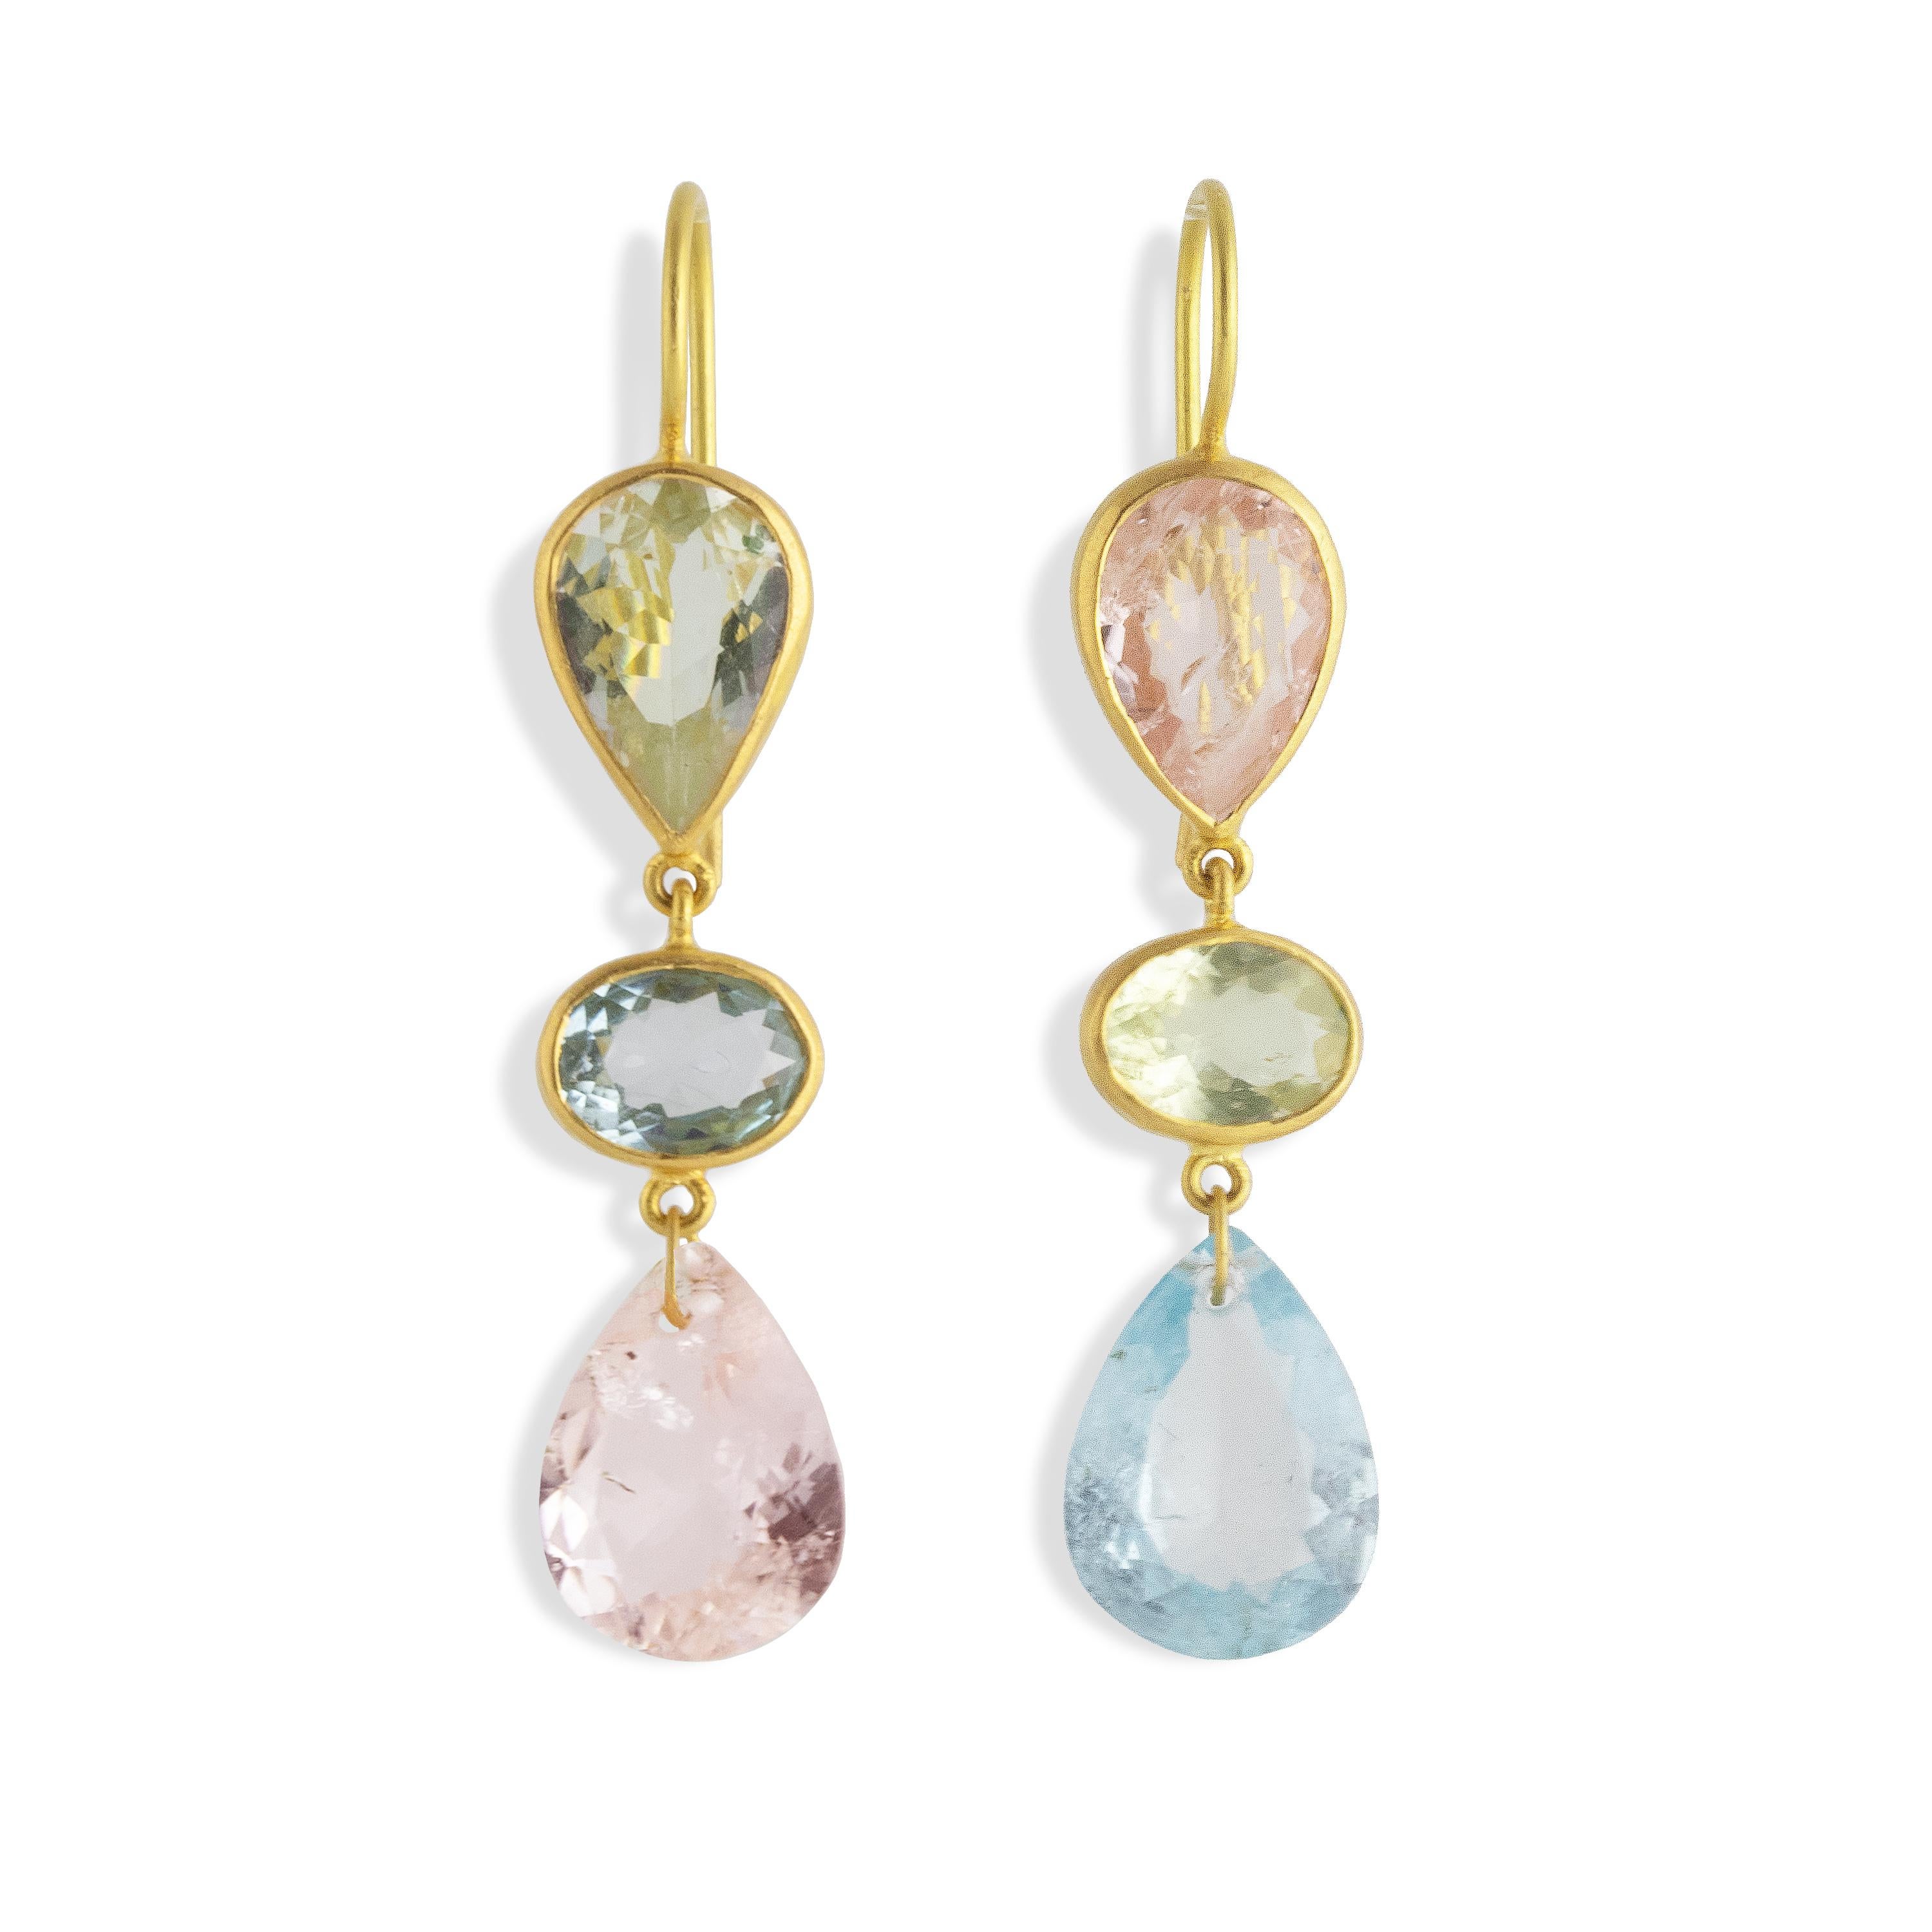 These beautiful pastel earrings are made up of various shades of gemstones from the Beryl family: Morganite, Aquamarine, and various shades of Green Beryl.  Set in 22k Matt gold.

Aquamarine is also associated with tranquility, serenity, clarity,